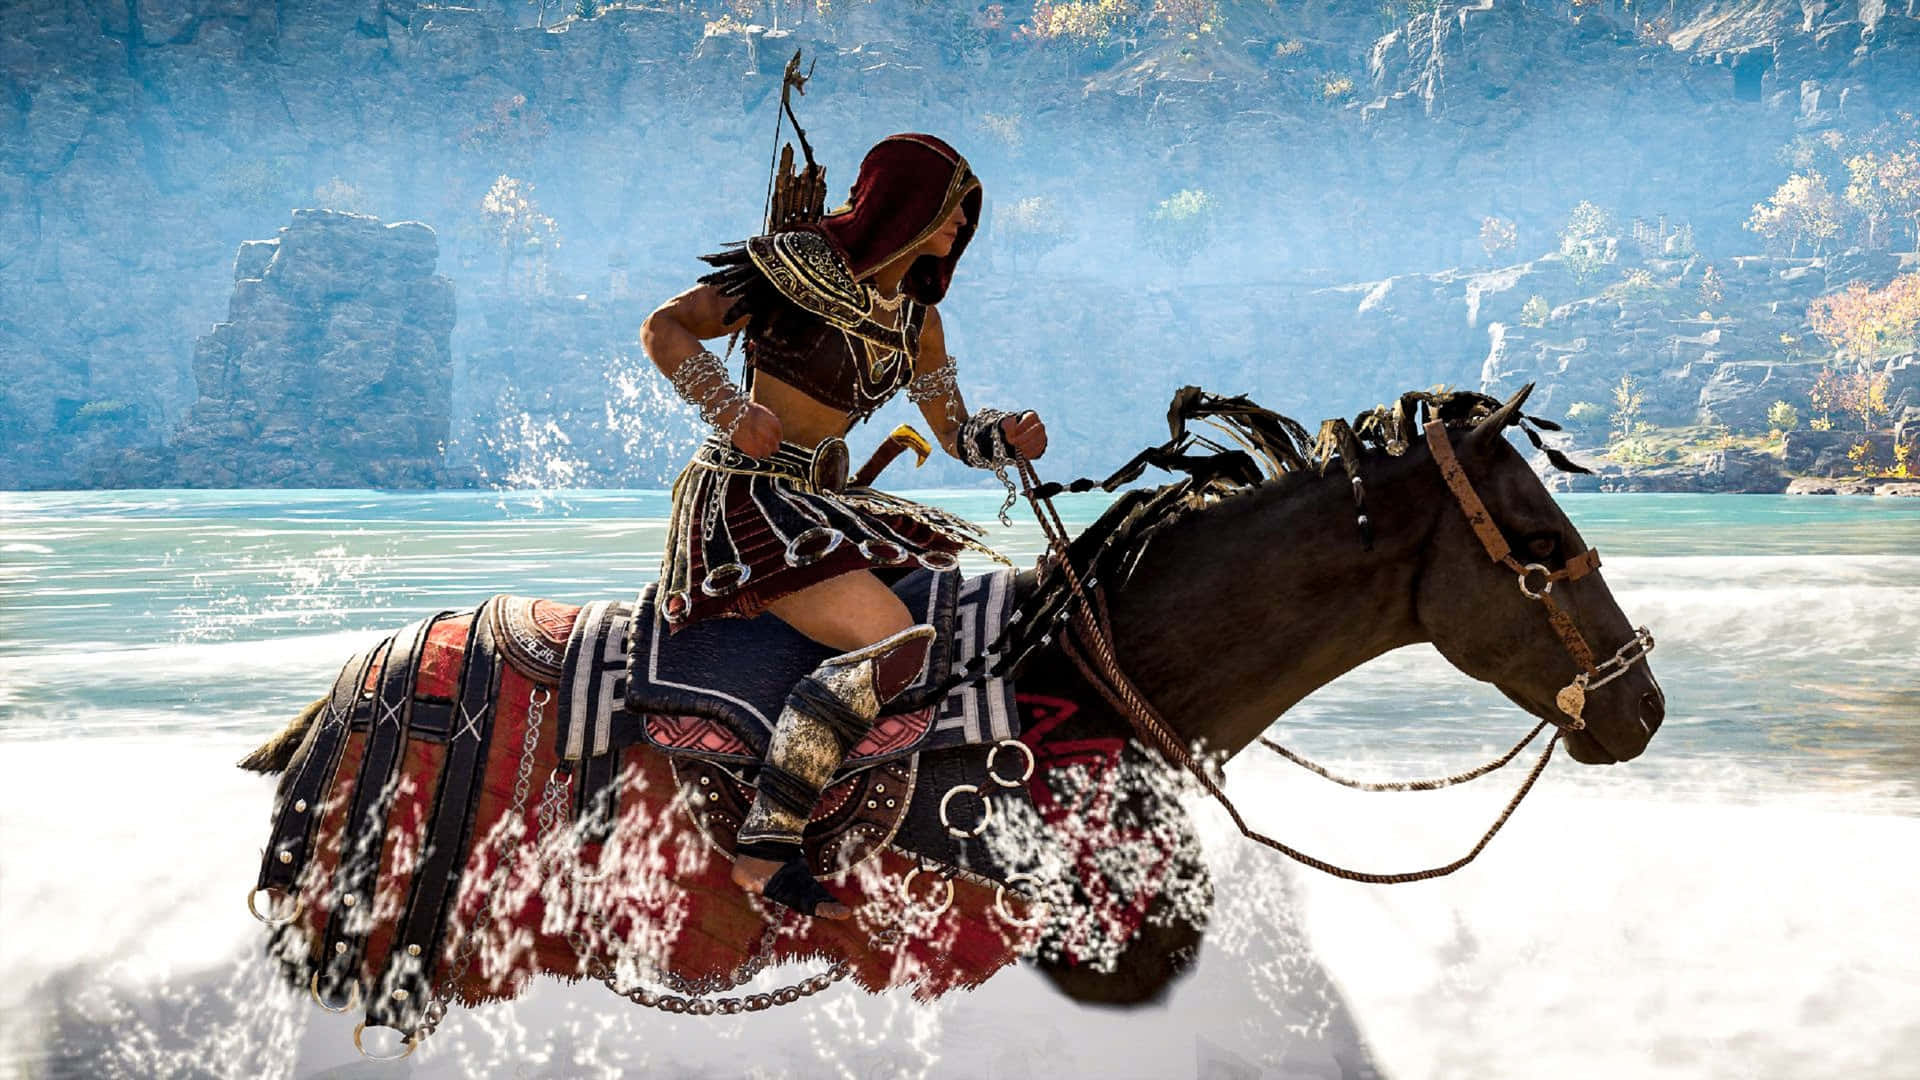 1920x1080 Assassin's Creed Odyssey Background Riding